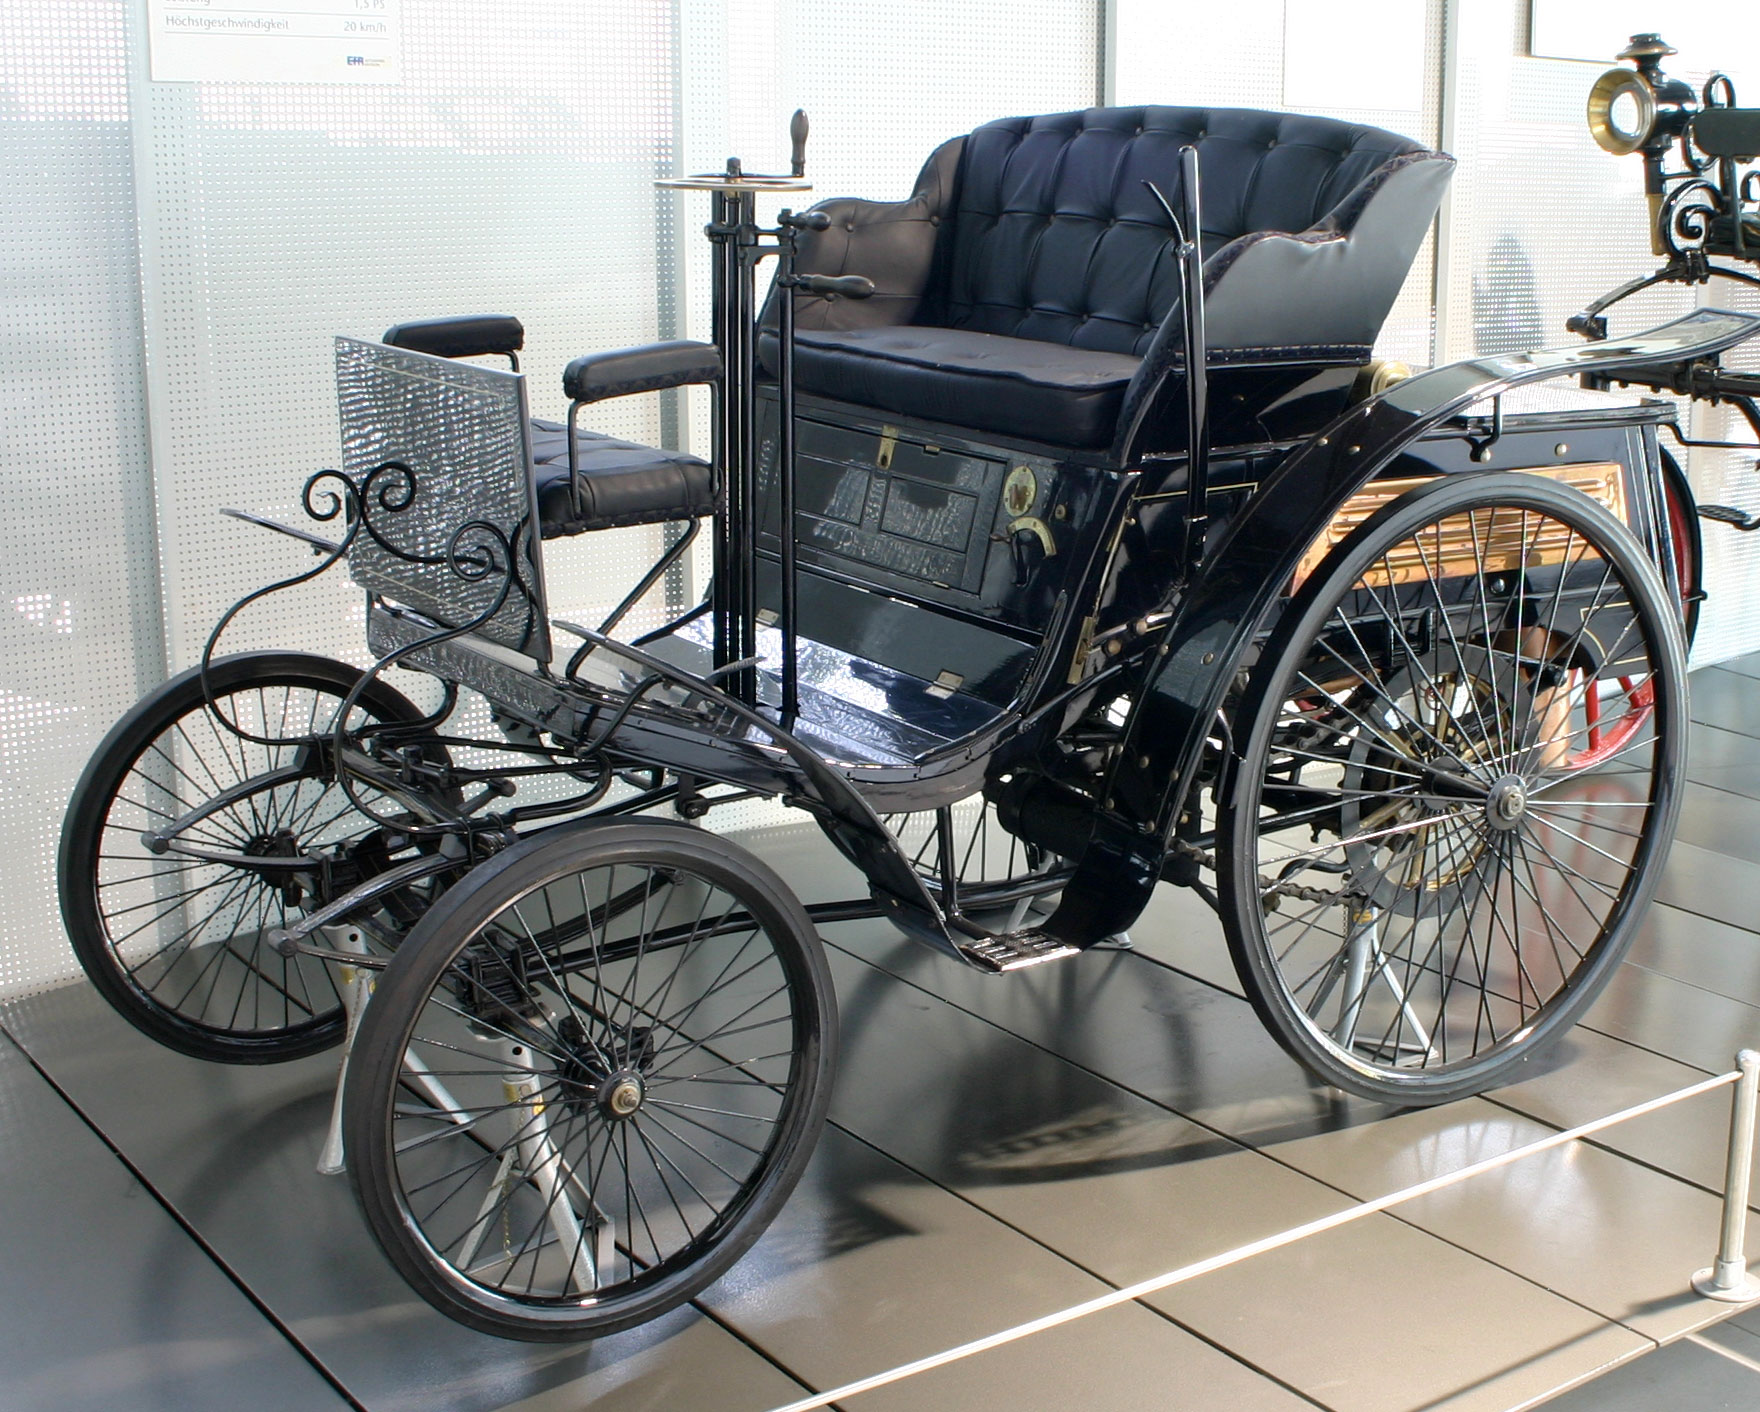 Who invented the ford motor car #2